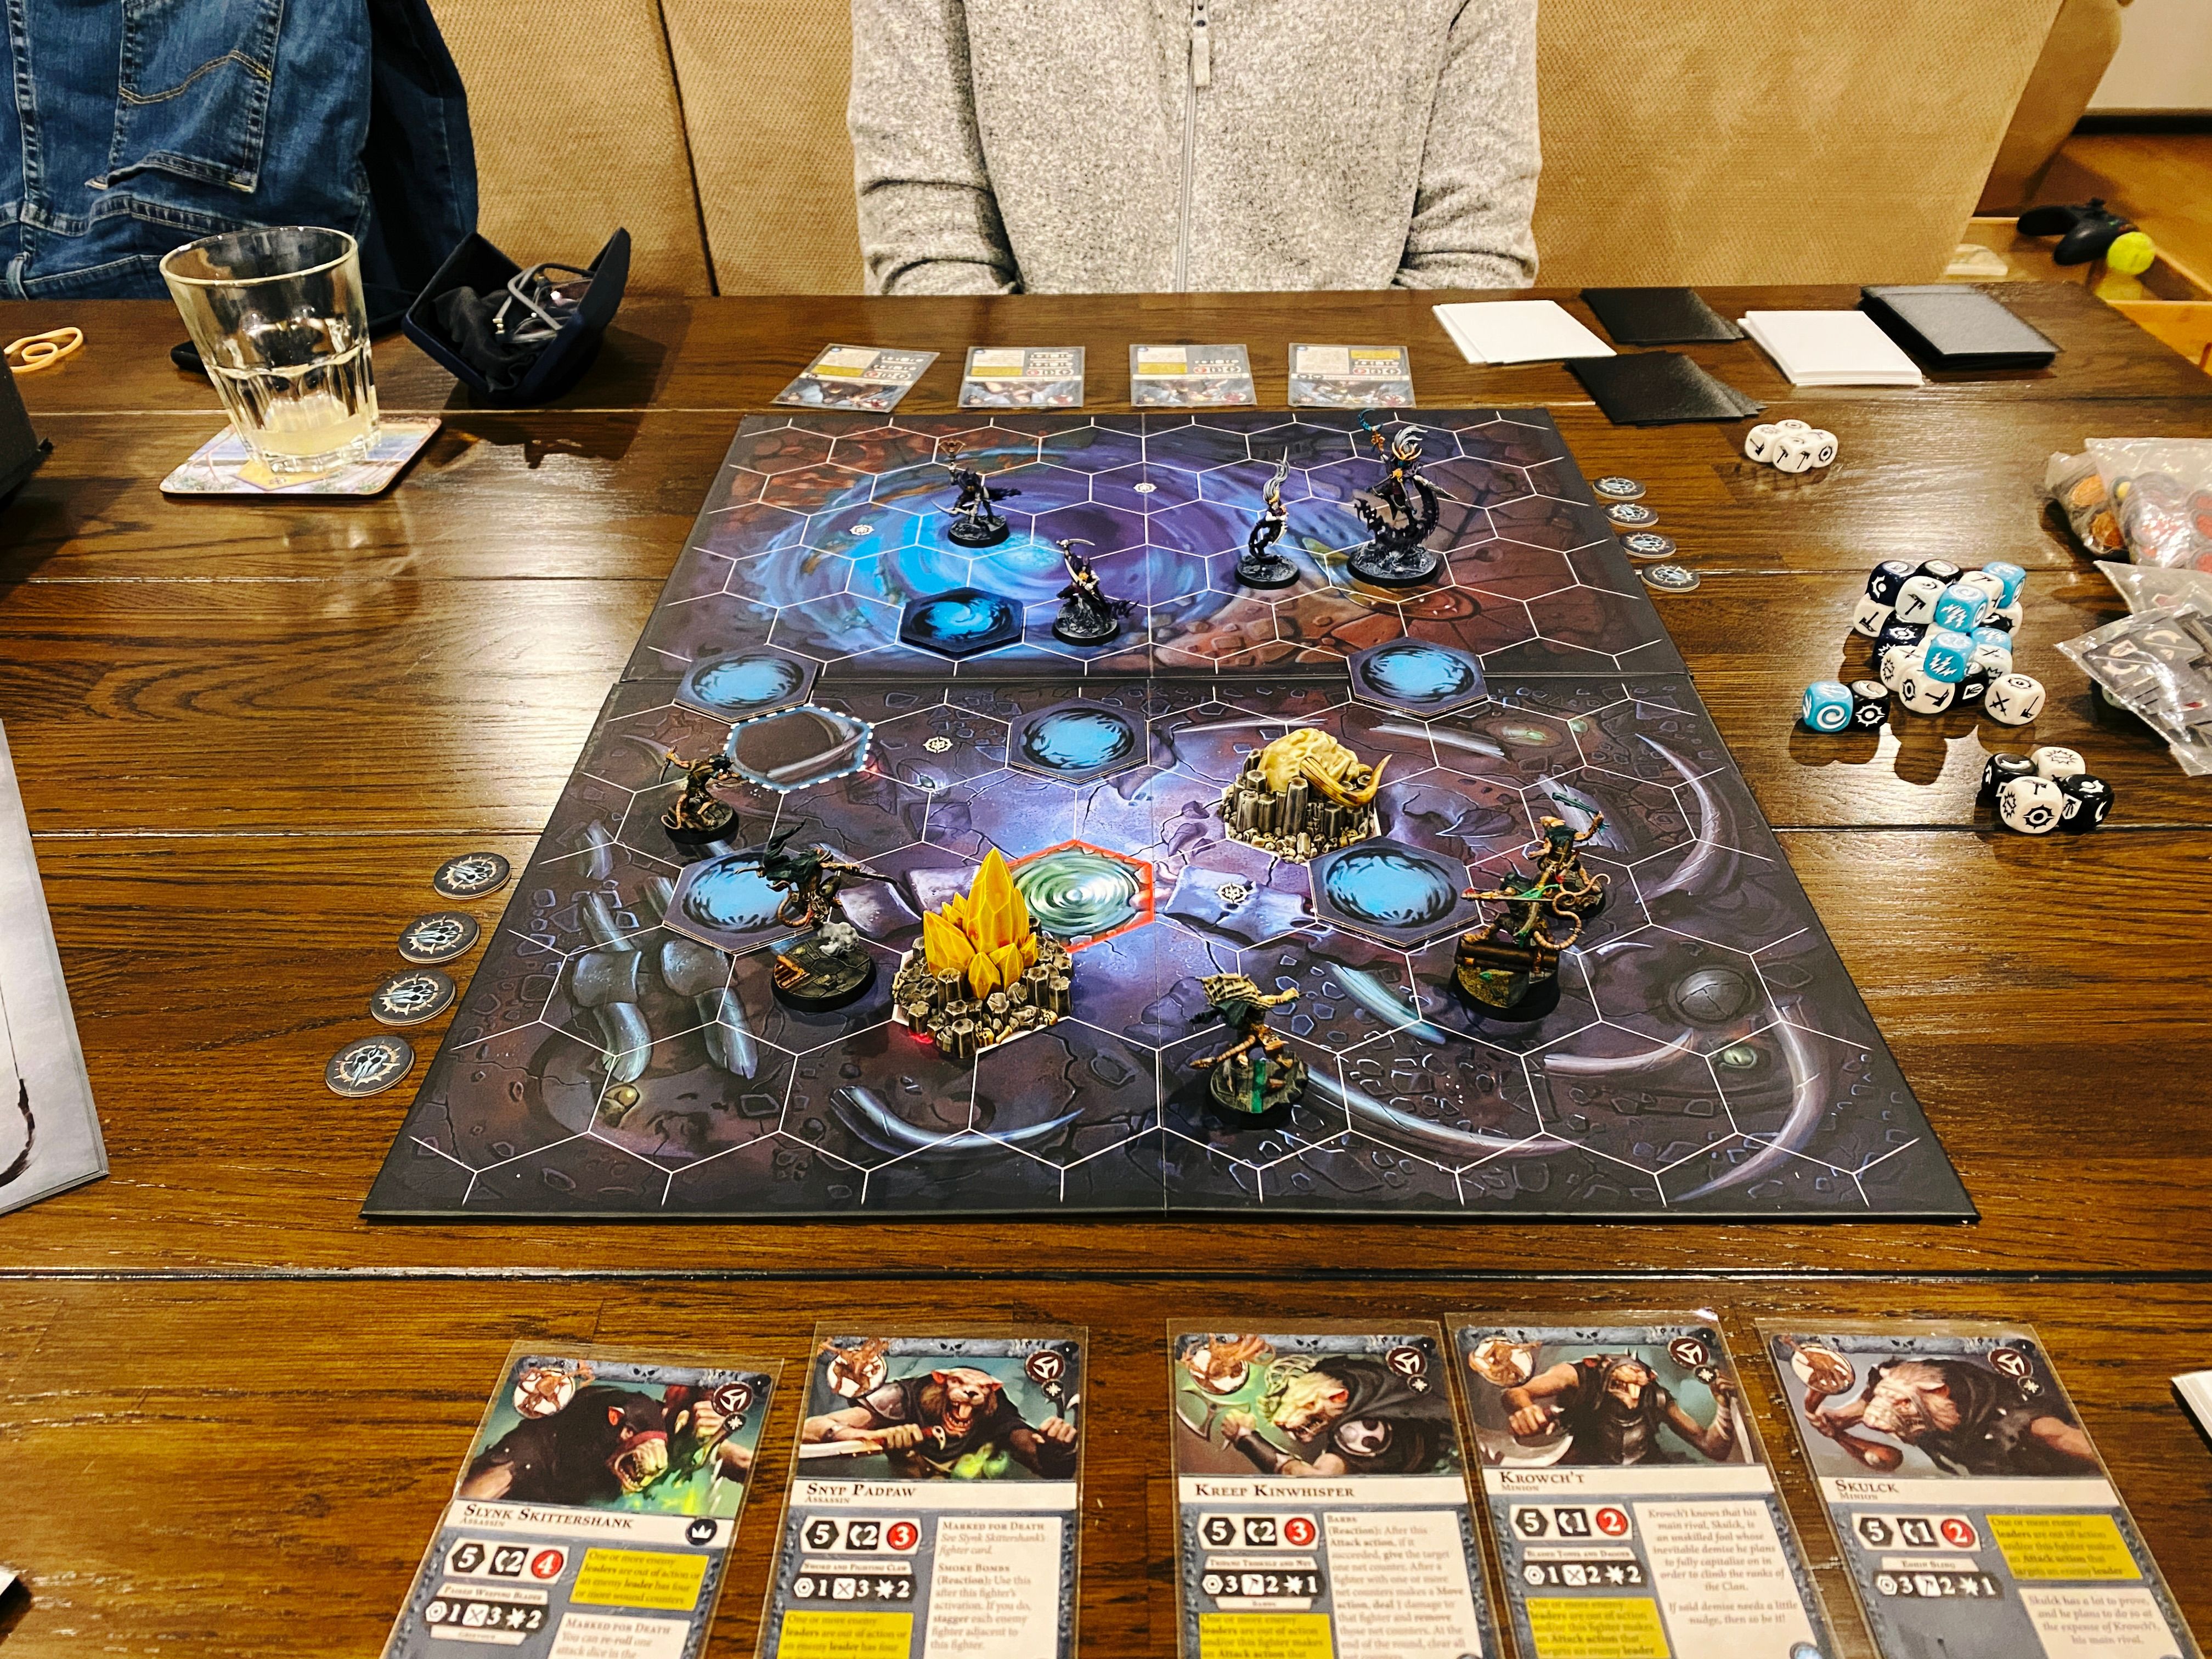 A photo of a two-player game of Warhammer Underworlds. It's played on a deck with hexes on it, the artwork on the board looks like it's in a sea cave or something. Closest to the camera are five Skaven (ratmen) assassins, and facing them are four lithe elves painted mostly in deep purples.